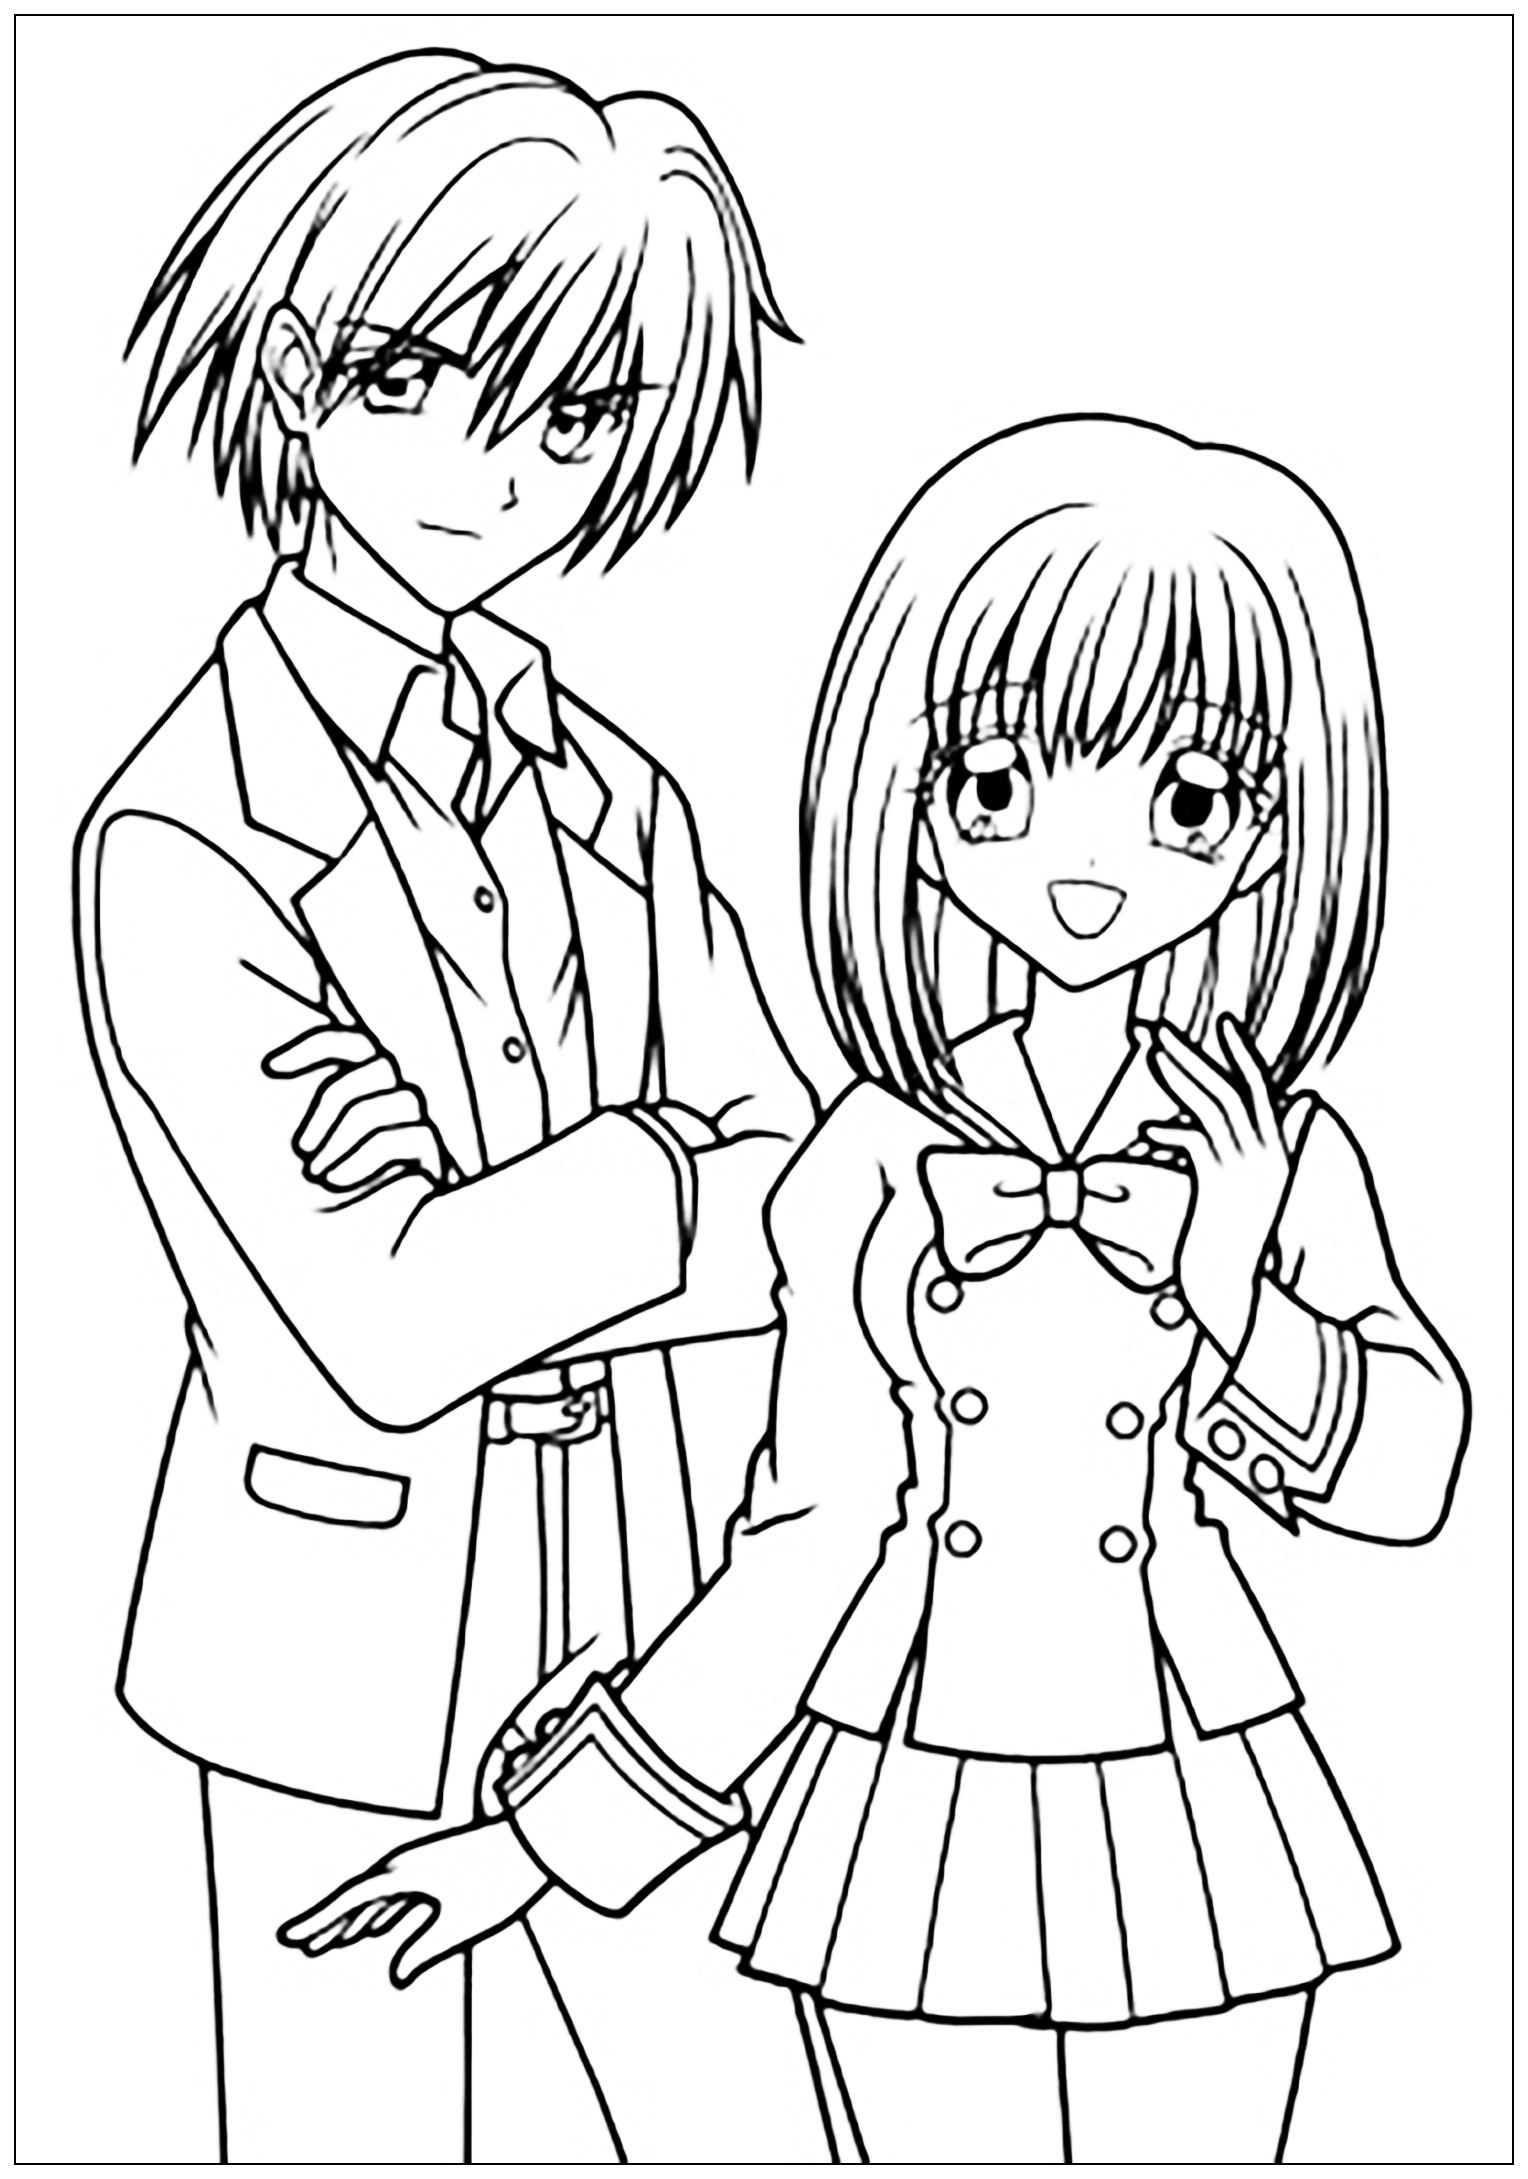 Anime Girl And Boy Coloring Pages
 Manga drawing boy and girl in school suit Manga Anime